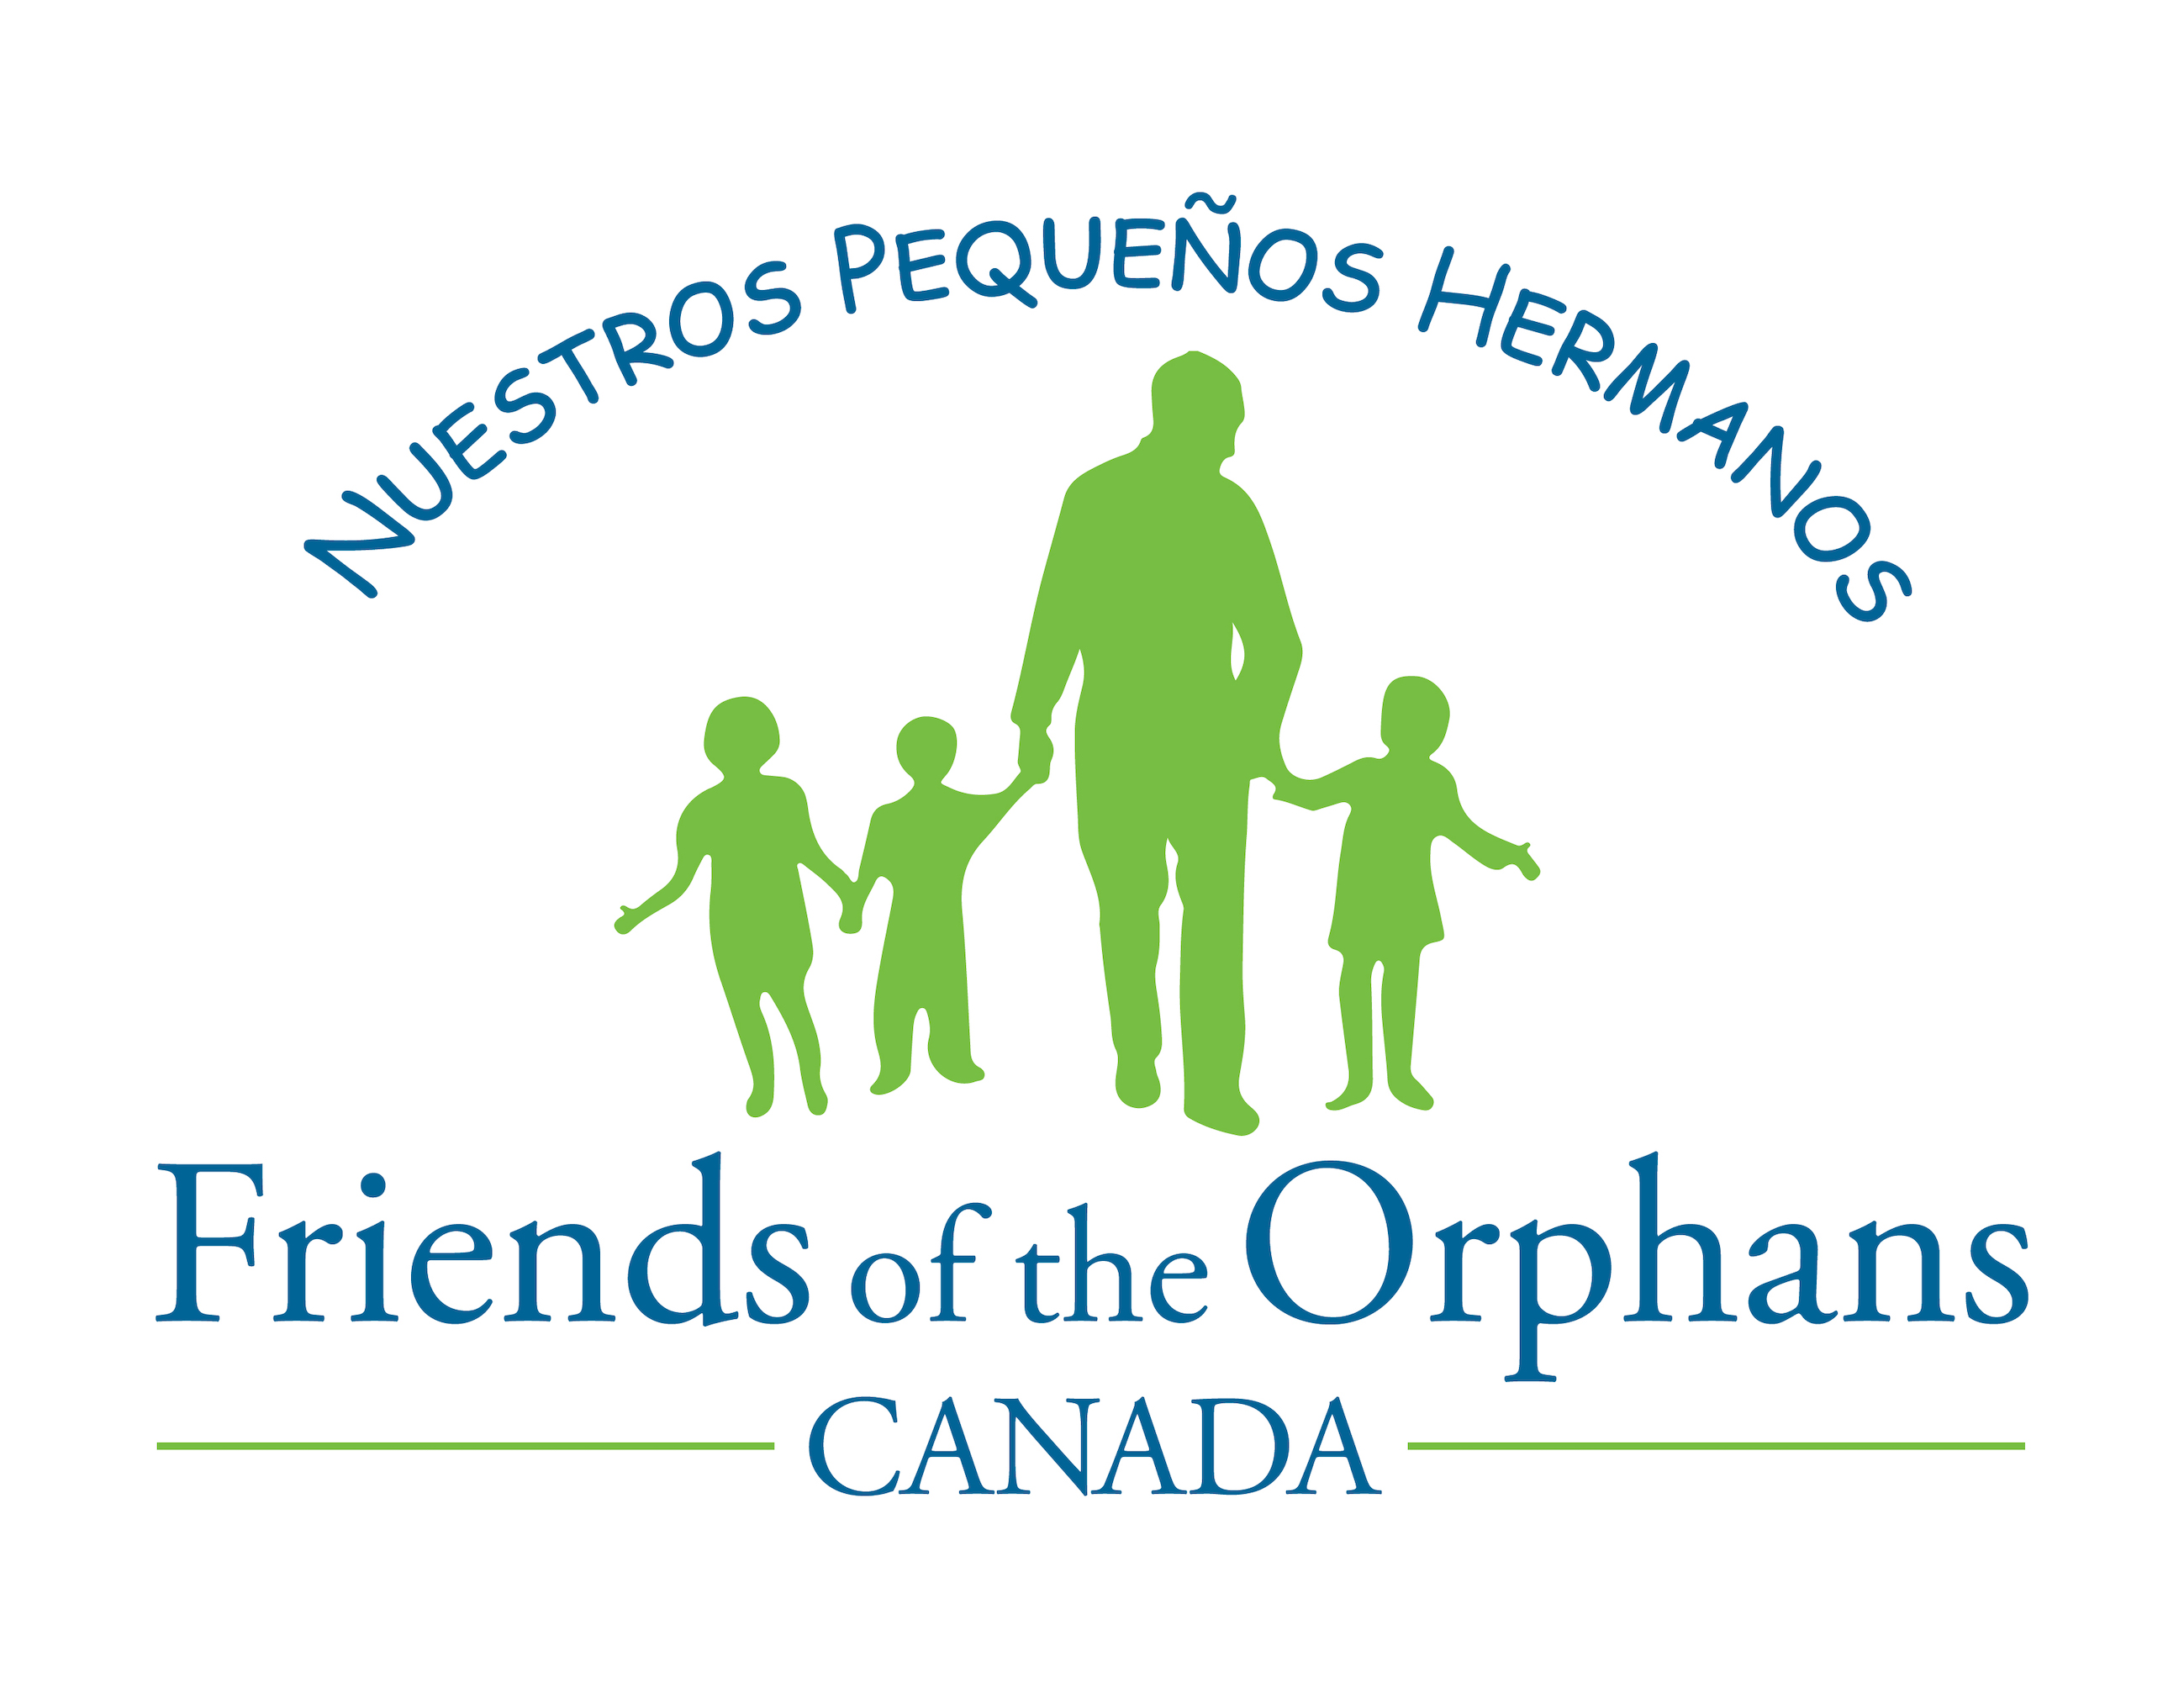 Friends of the Orphans, Canada logo